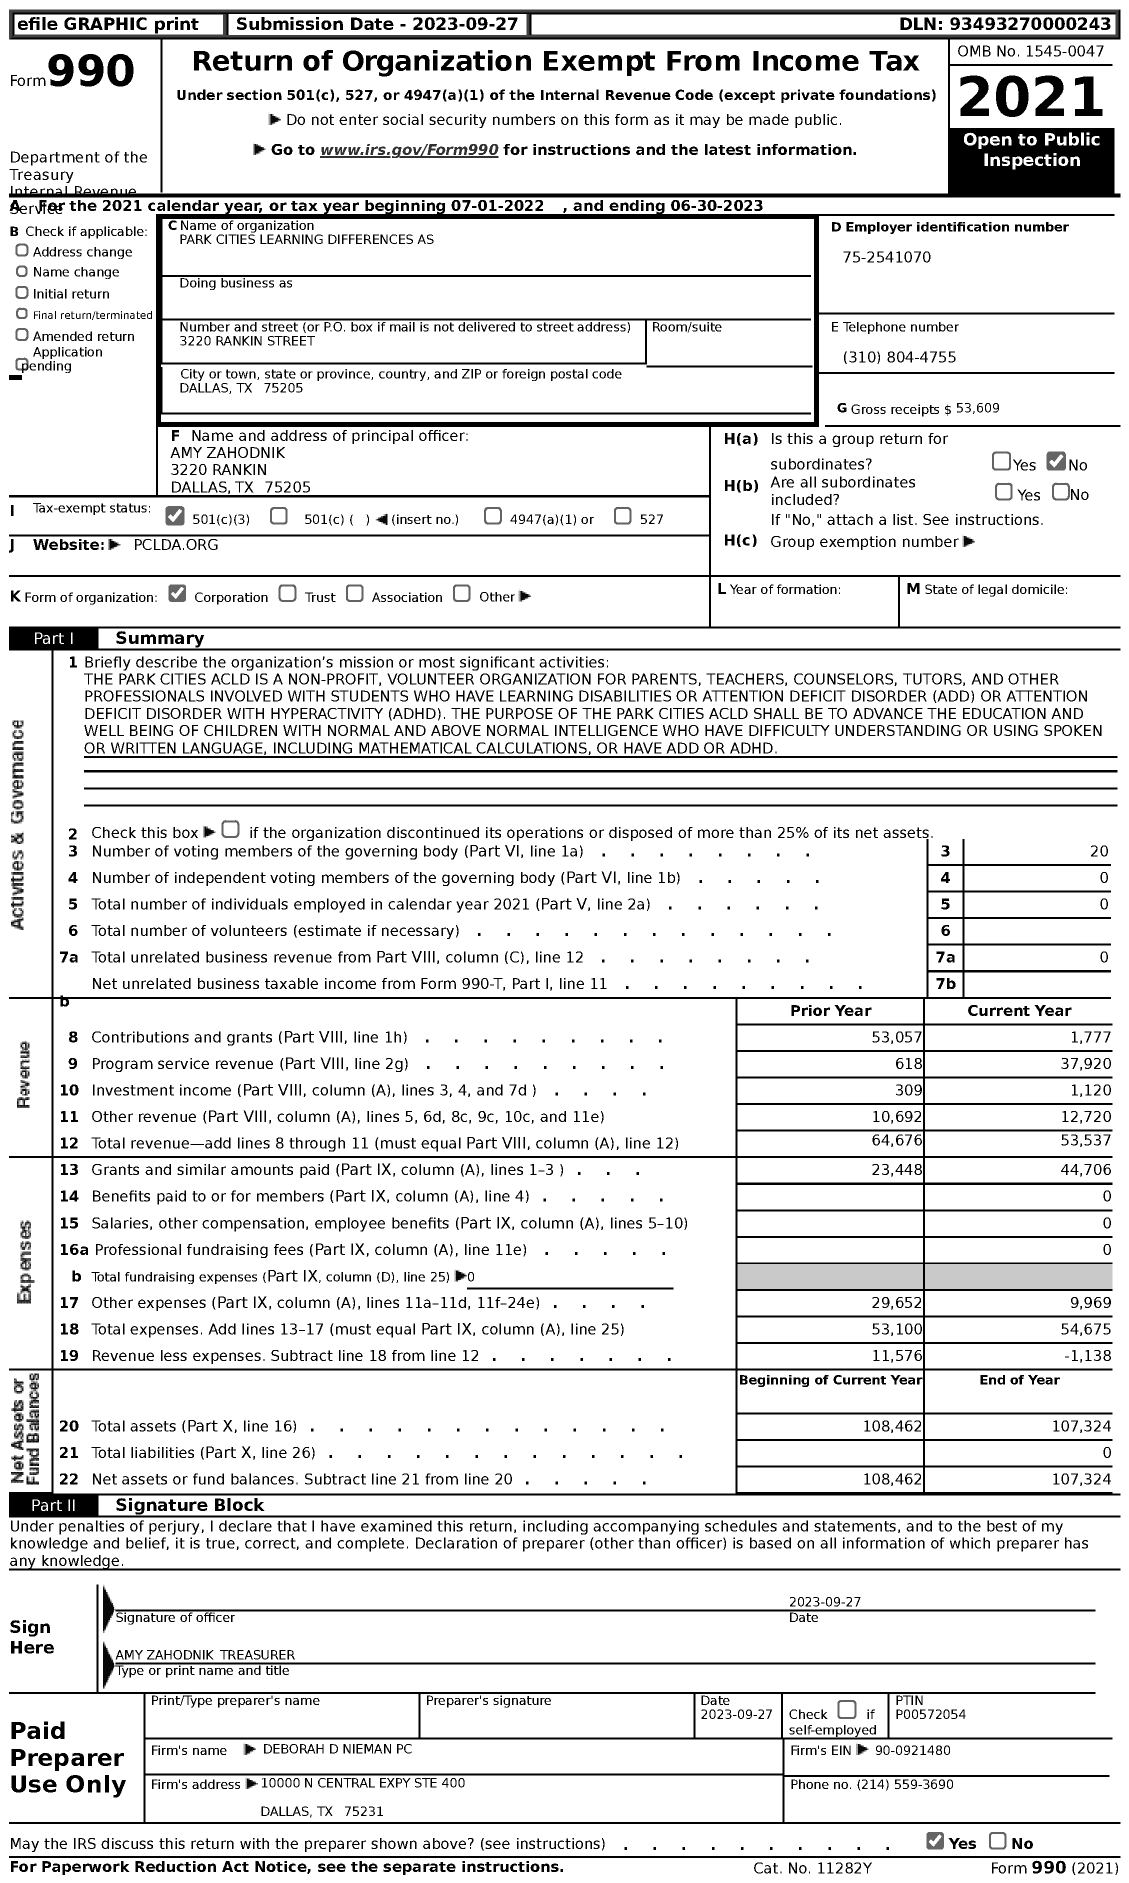 Image of first page of 2022 Form 990 for Park Cities Learning Differences As